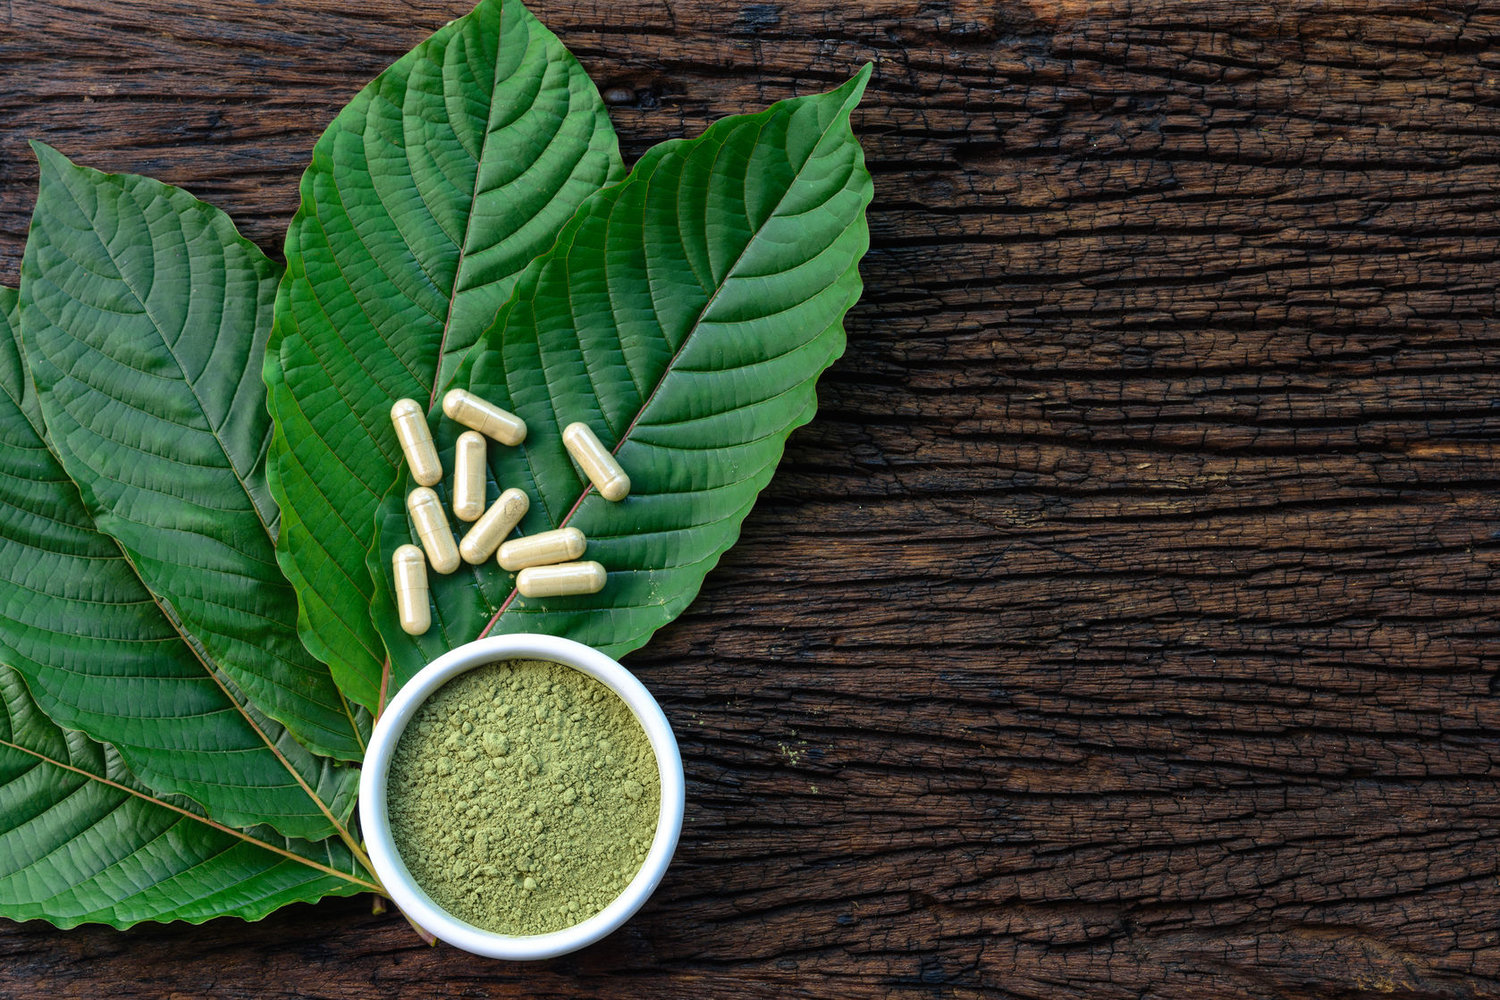 Kratom Extract vs. Powder: What's the Difference? | The Apopka Voice